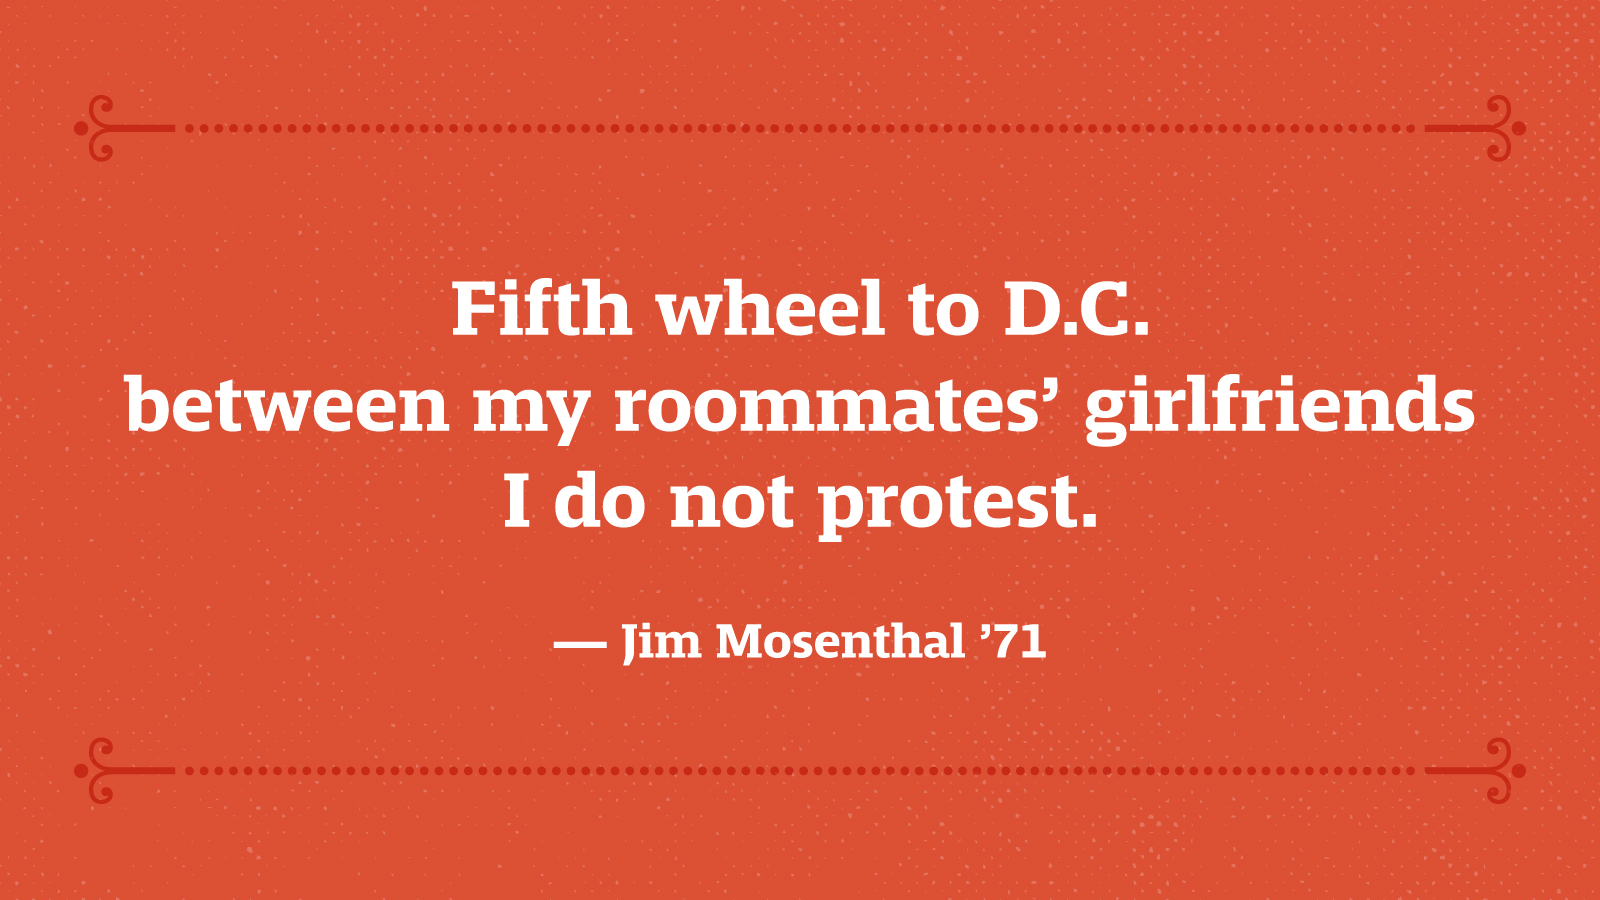 Fifth wheel to DC between my roommates’ girlfriends I do not protest. — Jim Mosenthal ’71